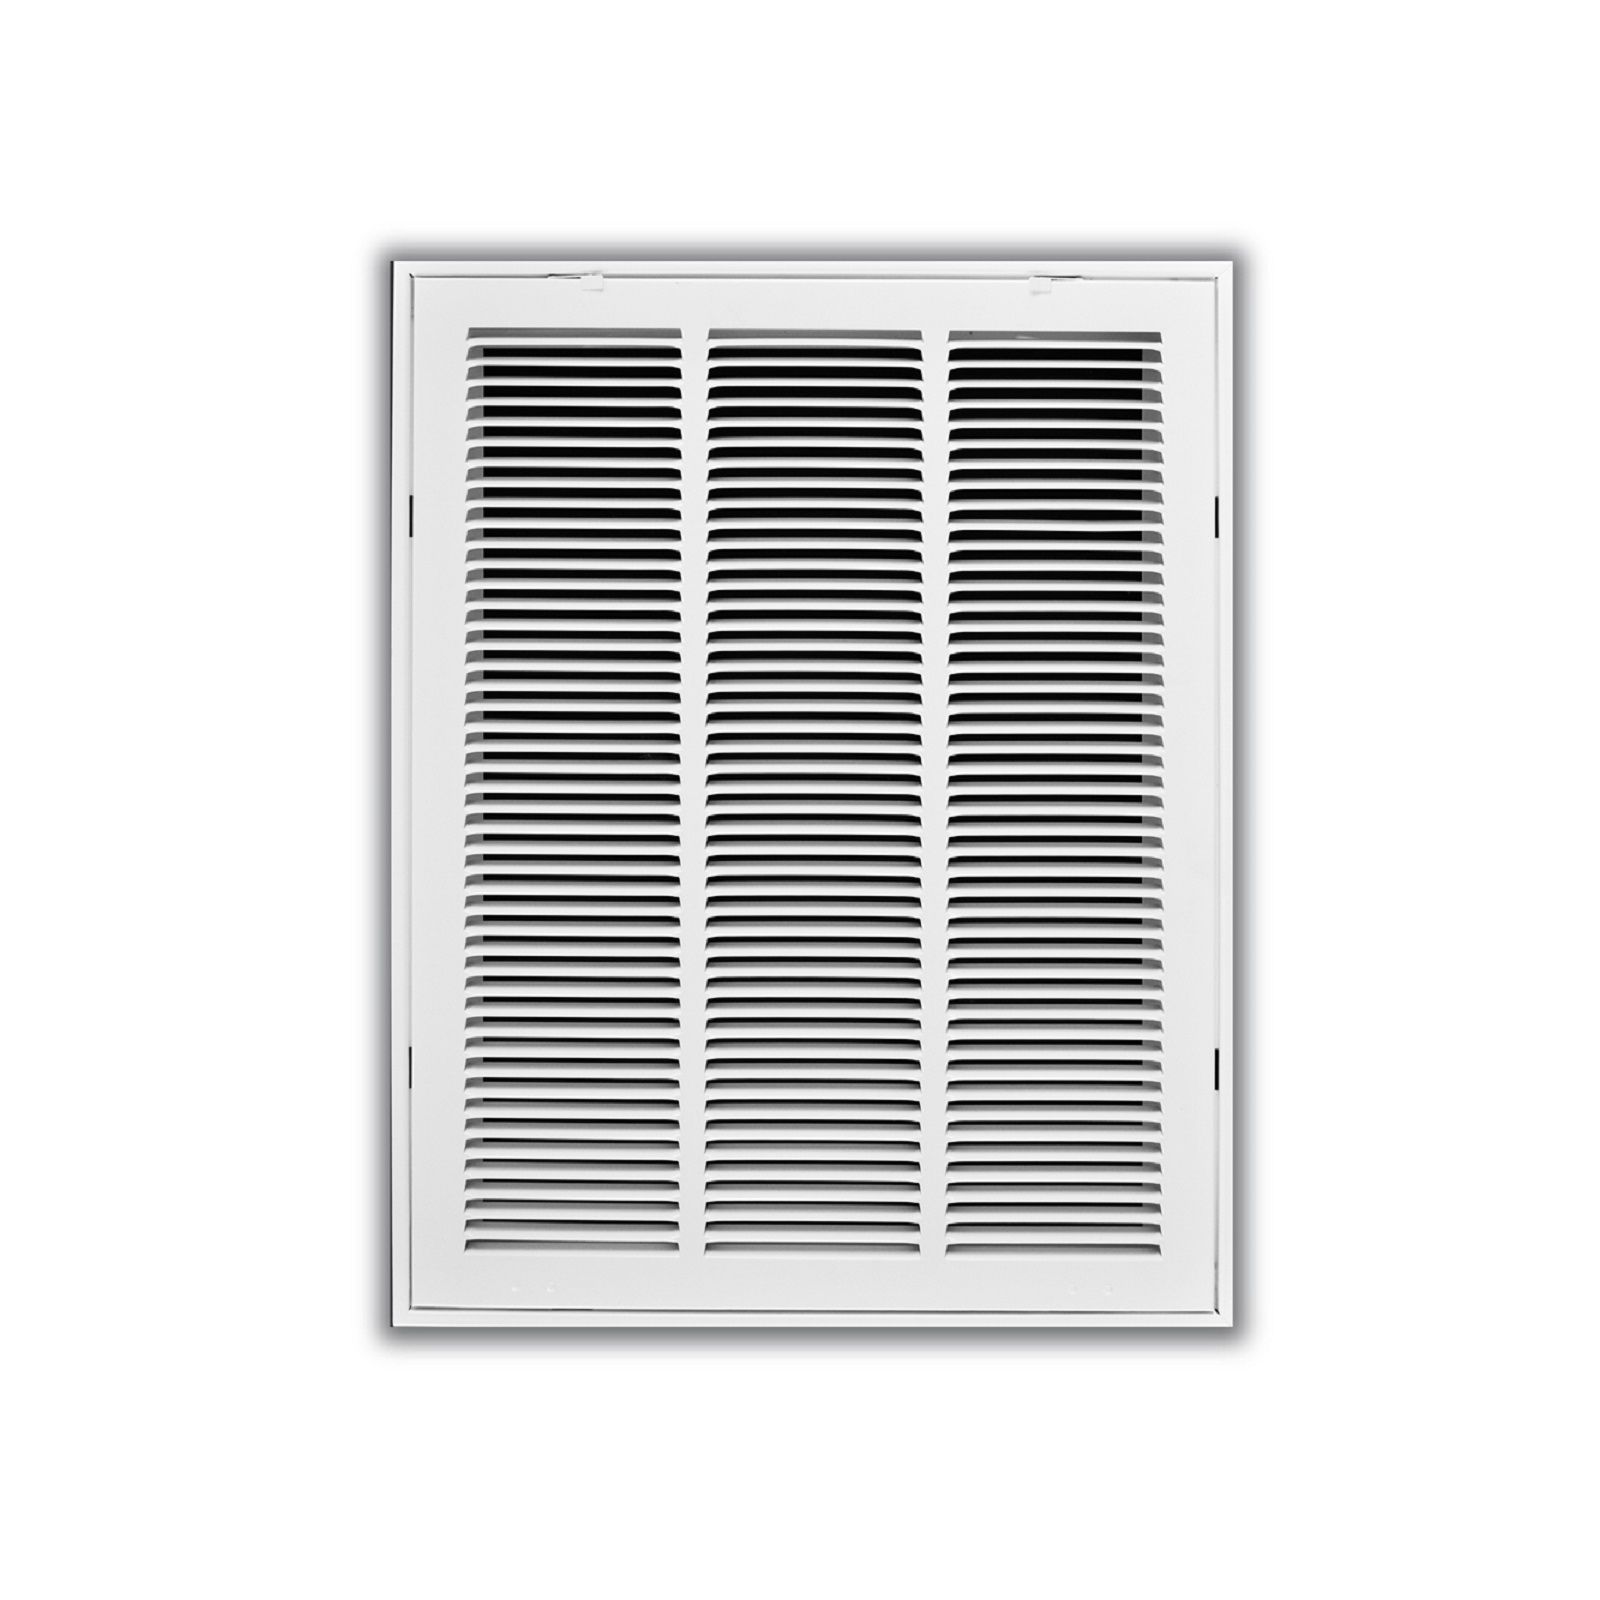 TRUaire 190 18X18 - Steel Return Air Filter Grille With Fixed Hinged Face, White, 18" X 18"